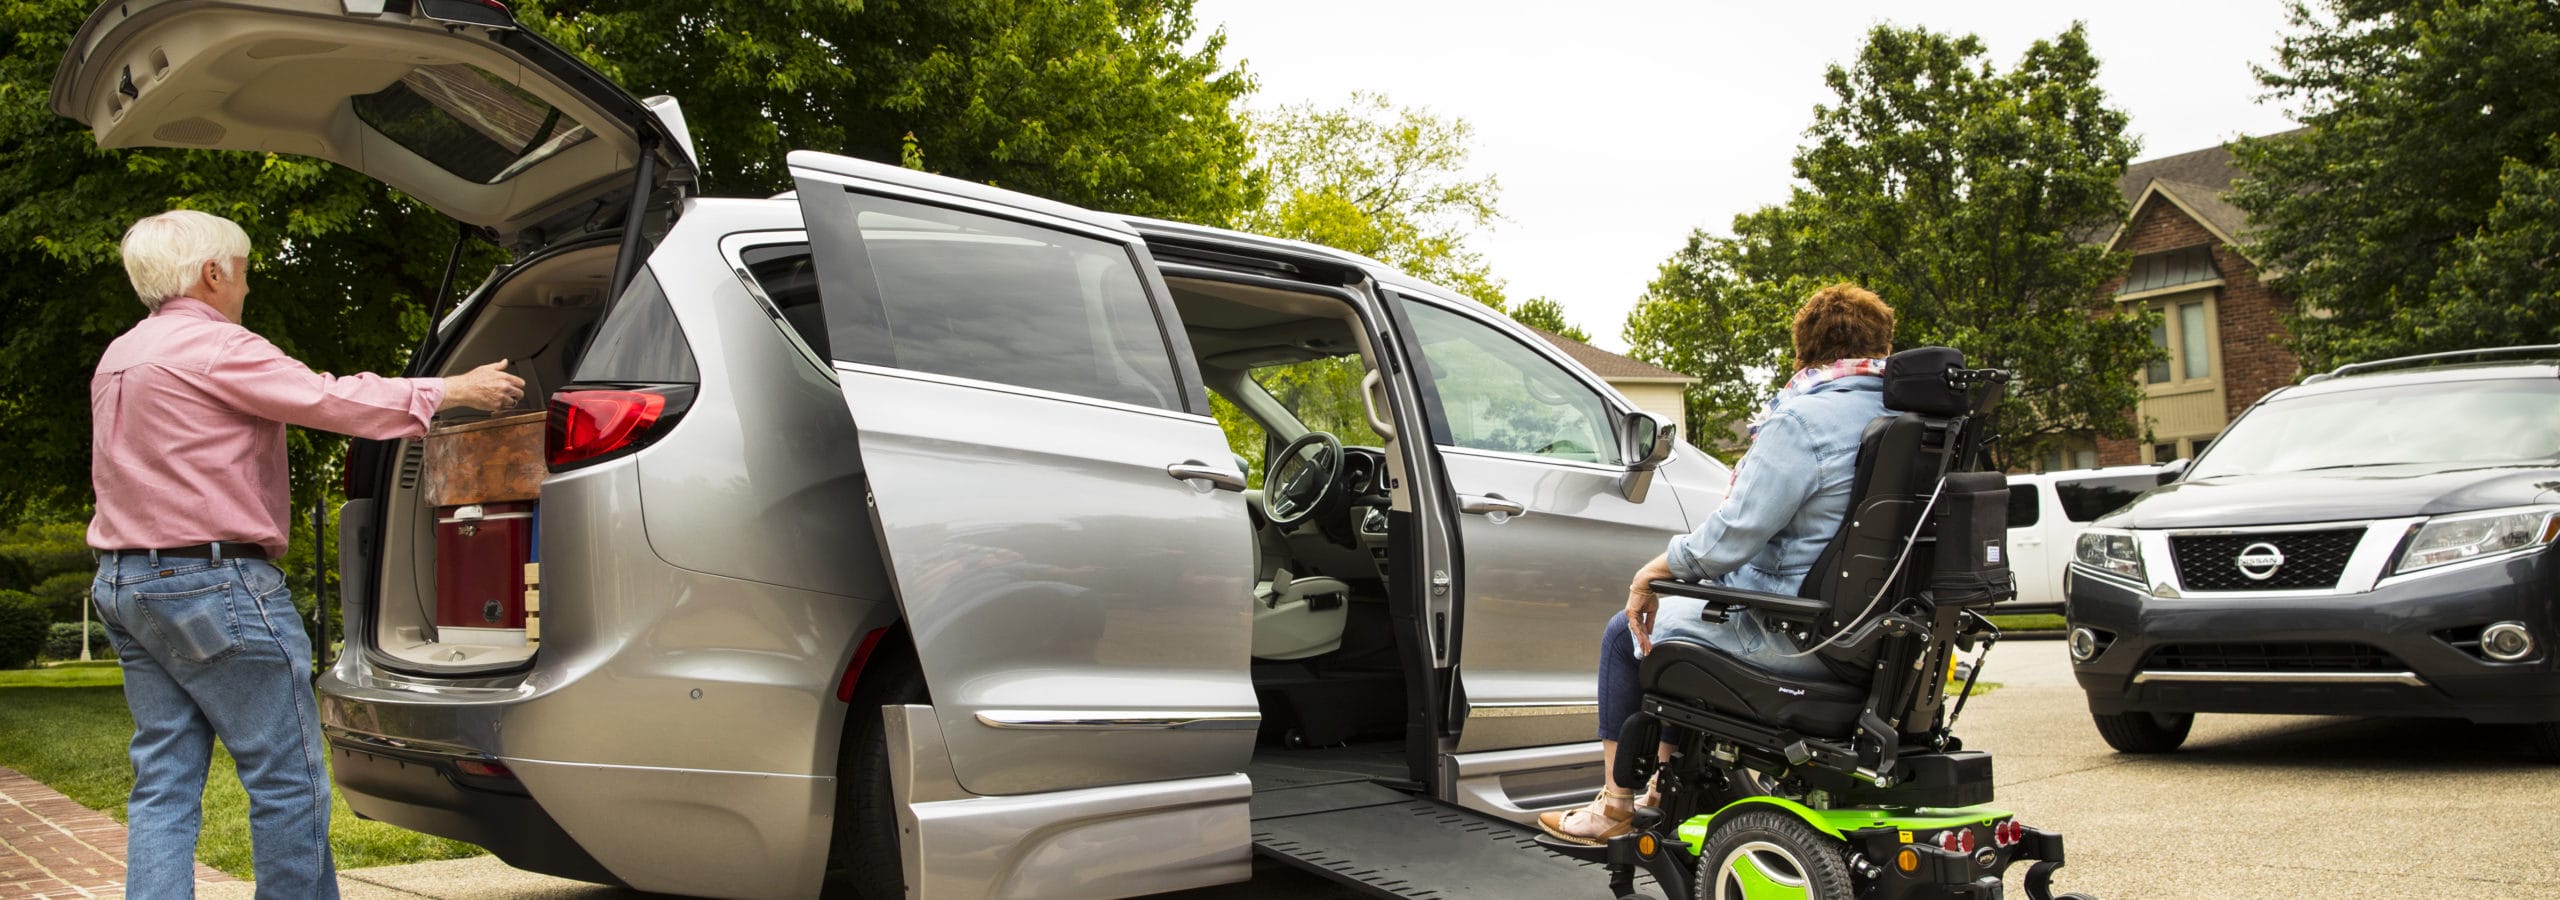 Experience the Largest Wheelchair SUV Ever - the BraunAbility